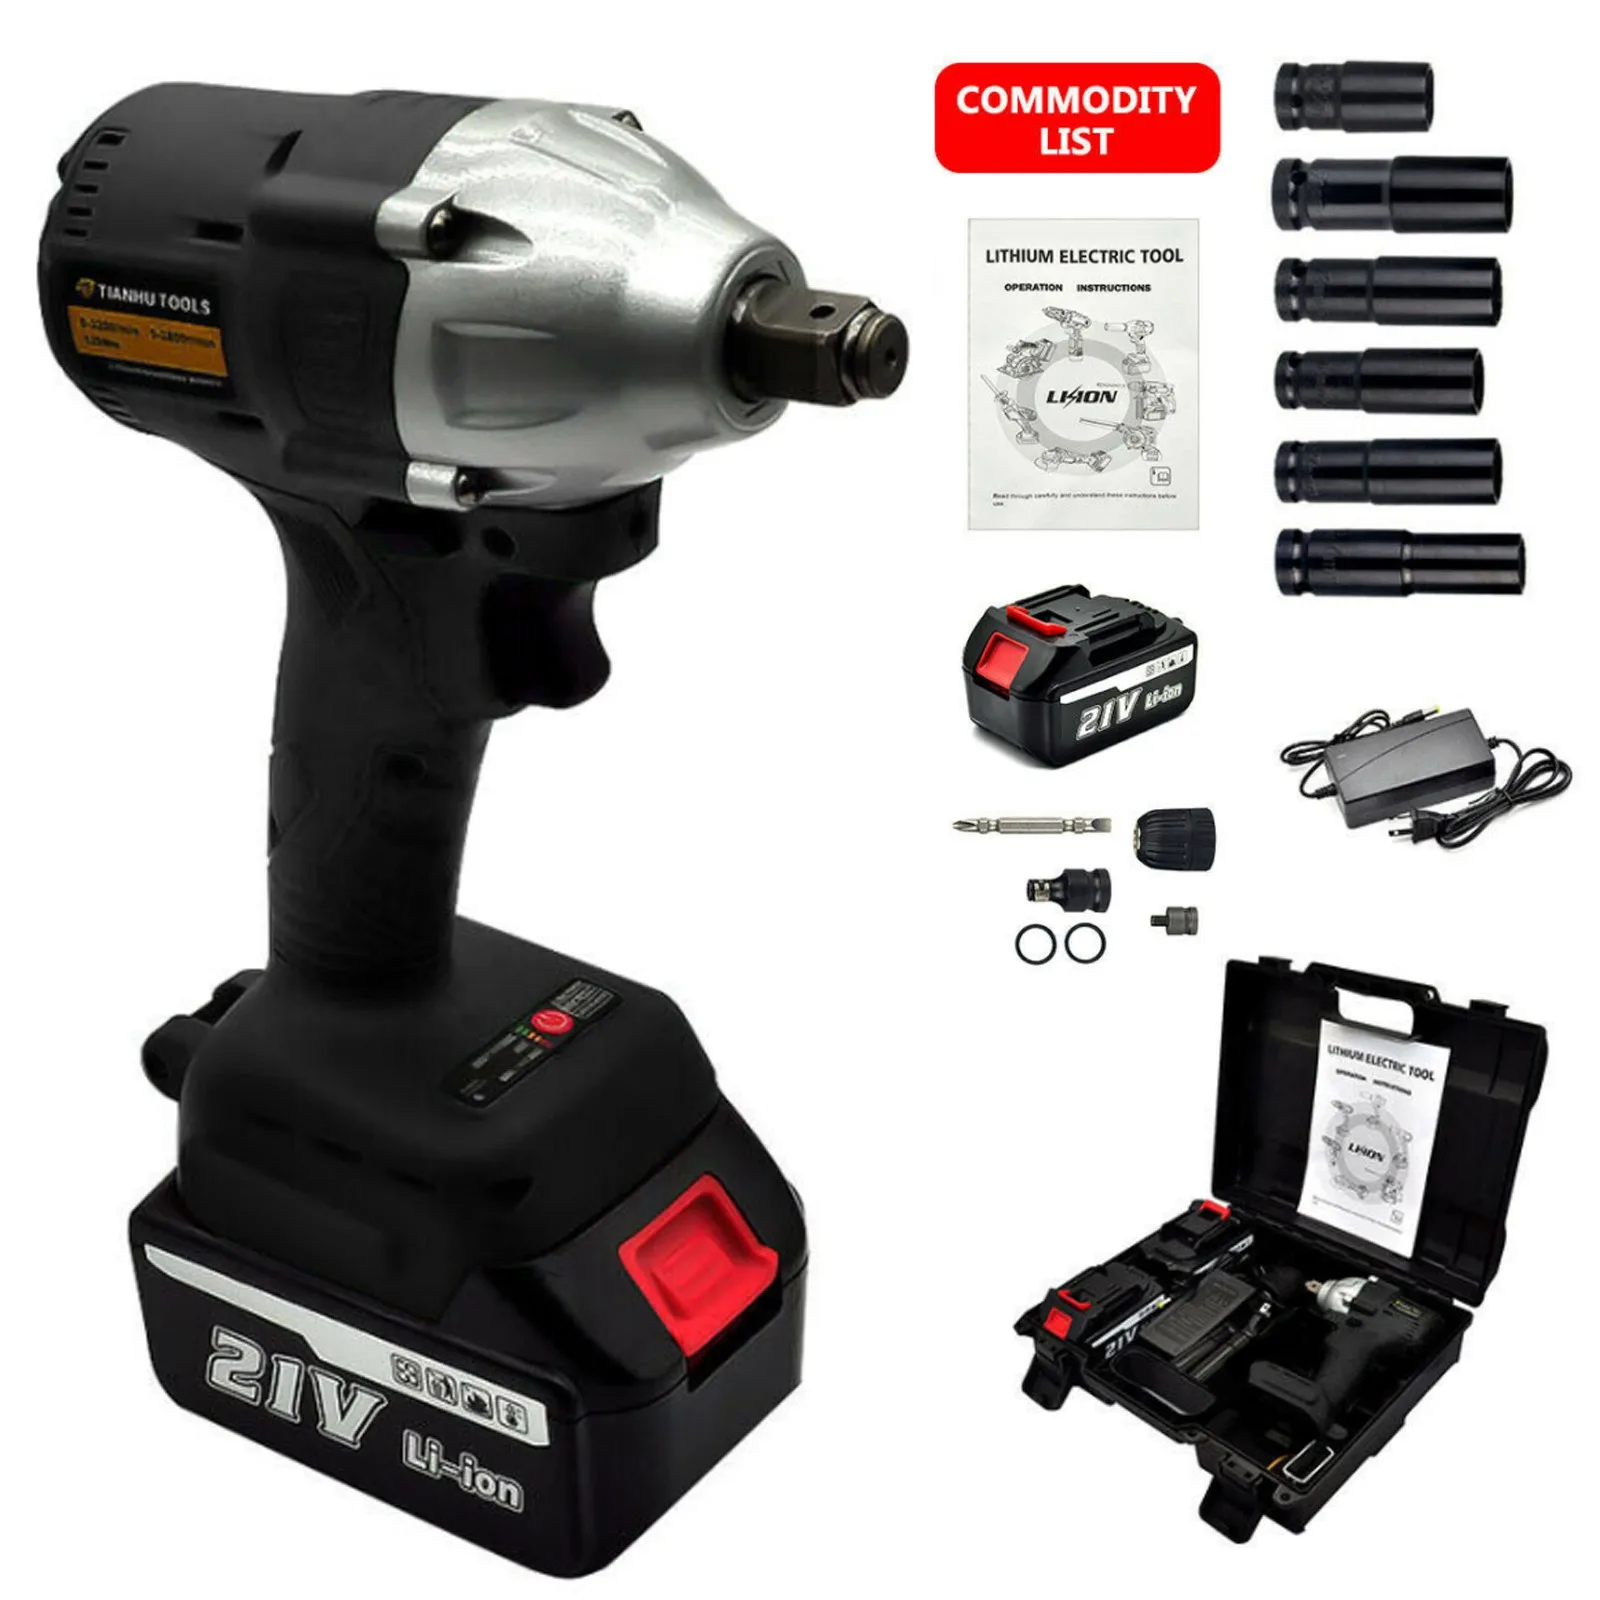 US 21V Electric Impact Wrench Drill Rattle Nut Gun Cordless For Makita Battety